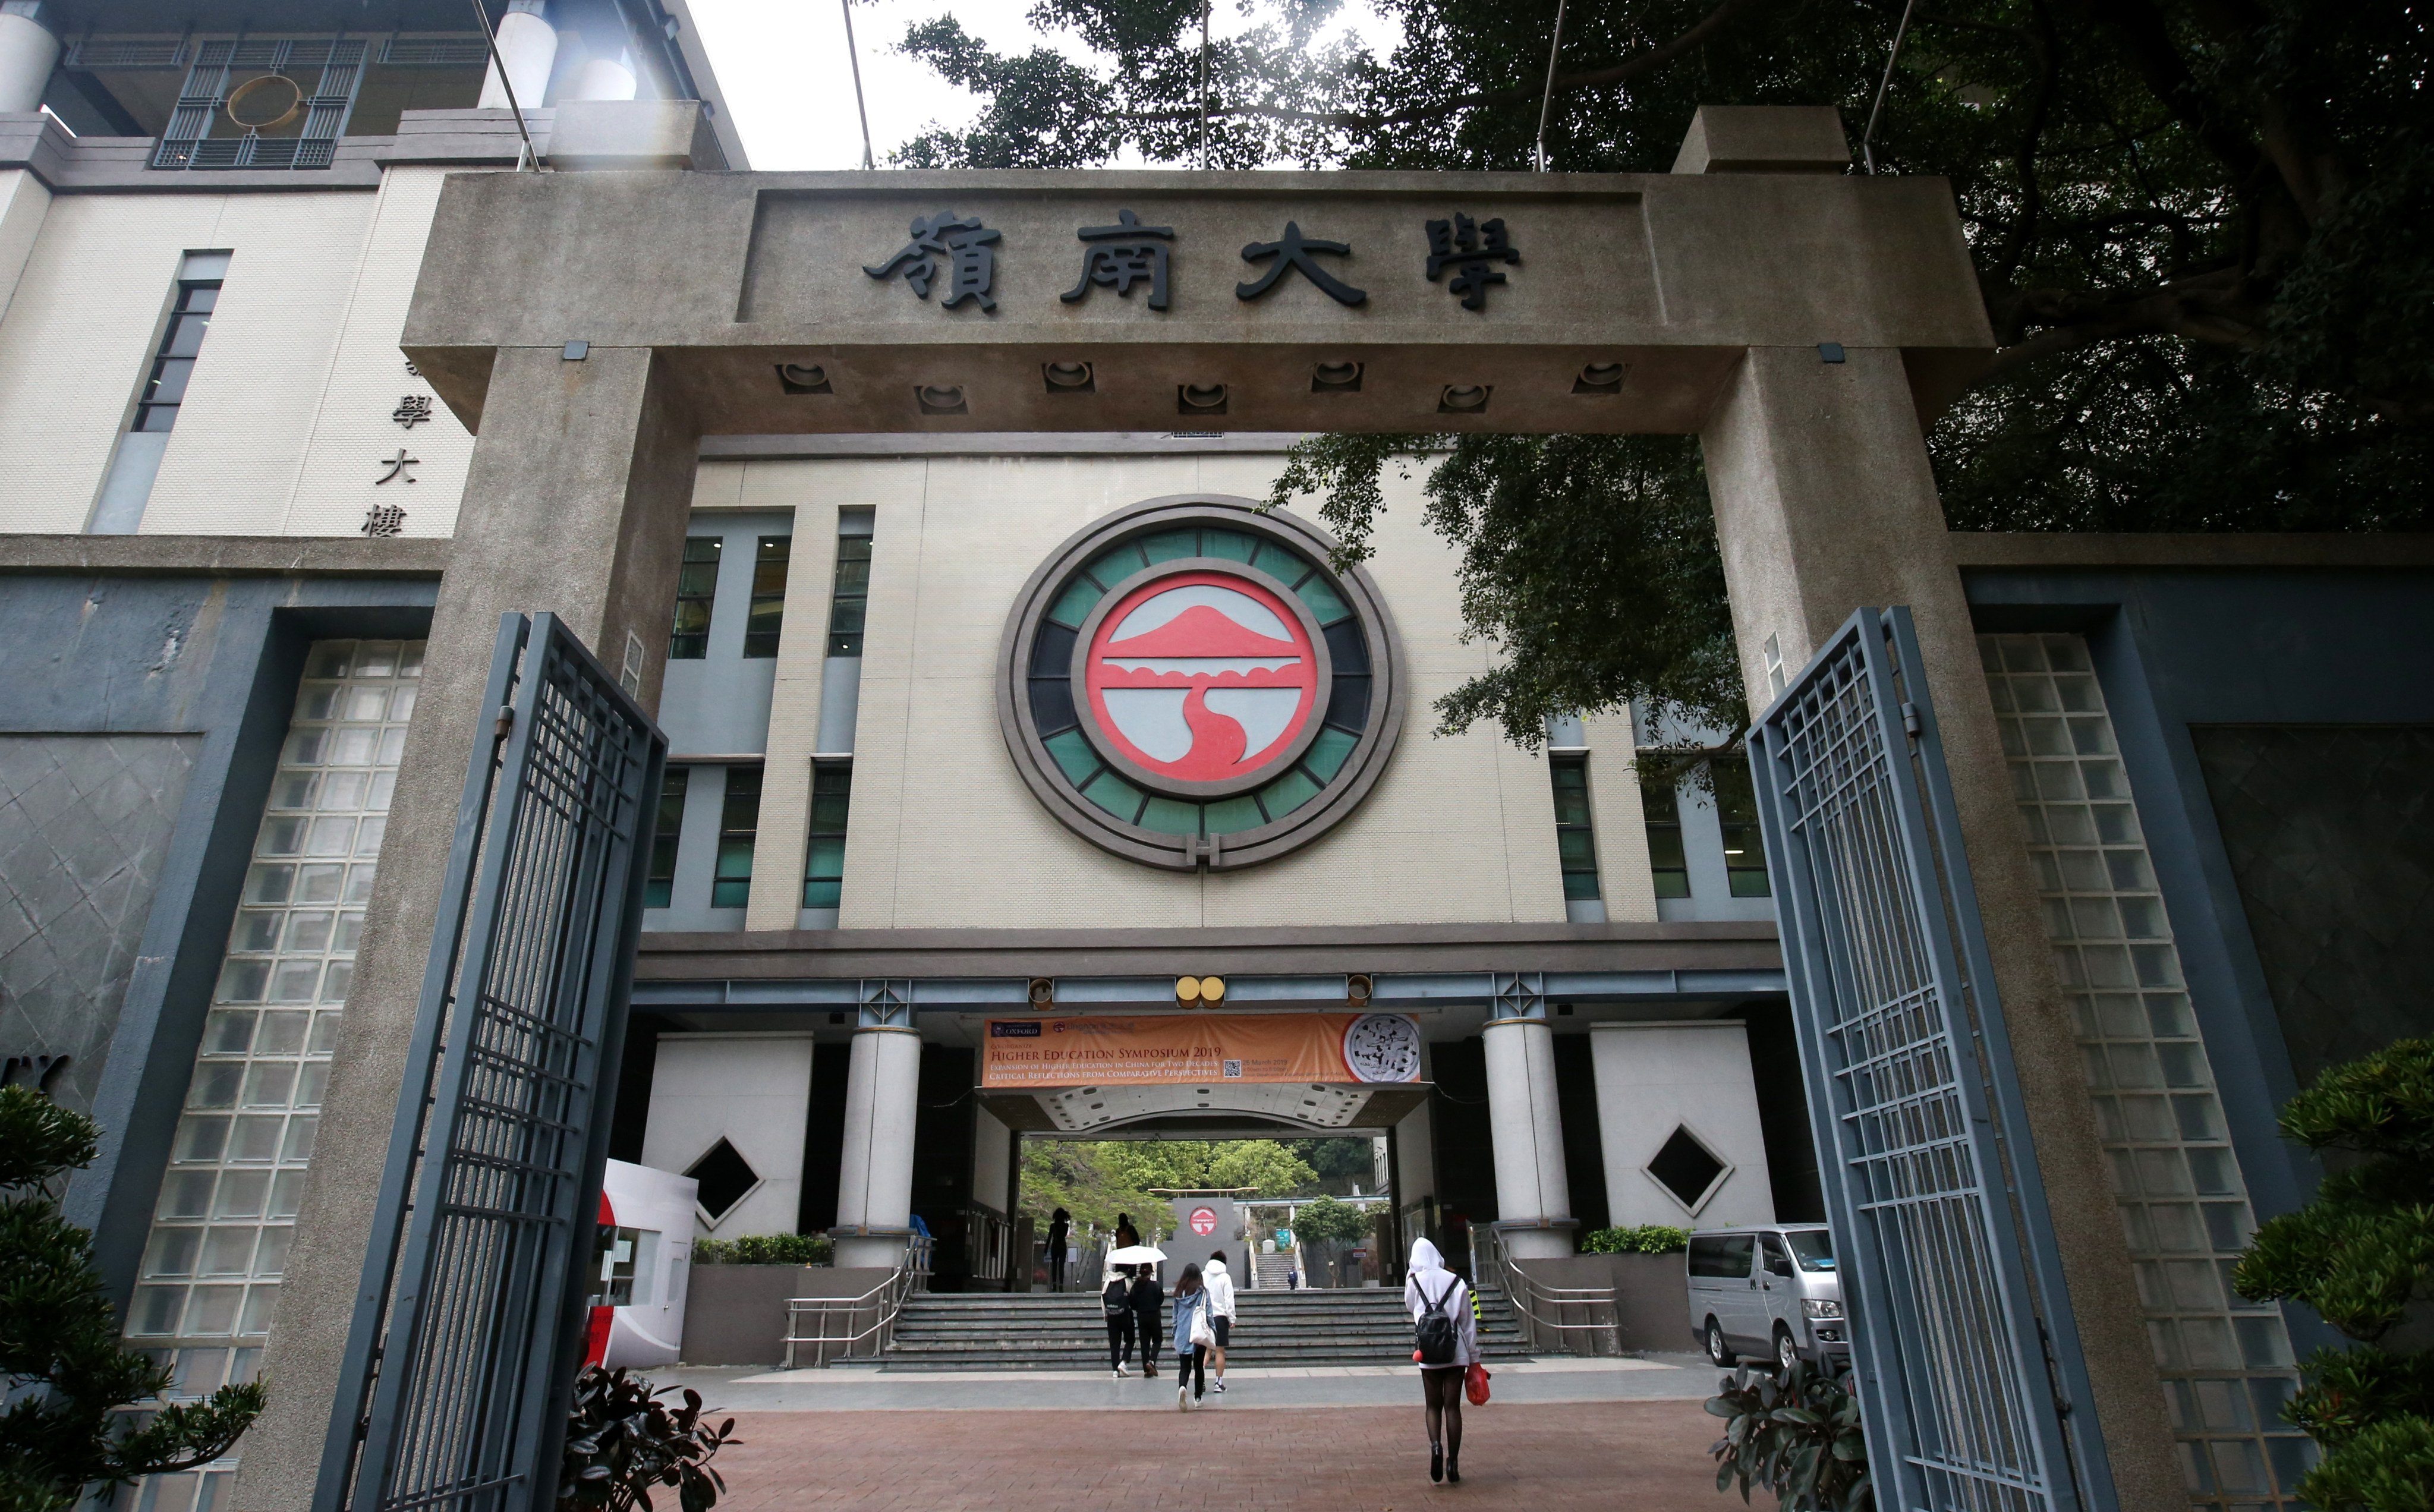 Lingnan University has placed stricter controls on student-led orientation activities, with events this year vetted by the university. Photo: David Wong